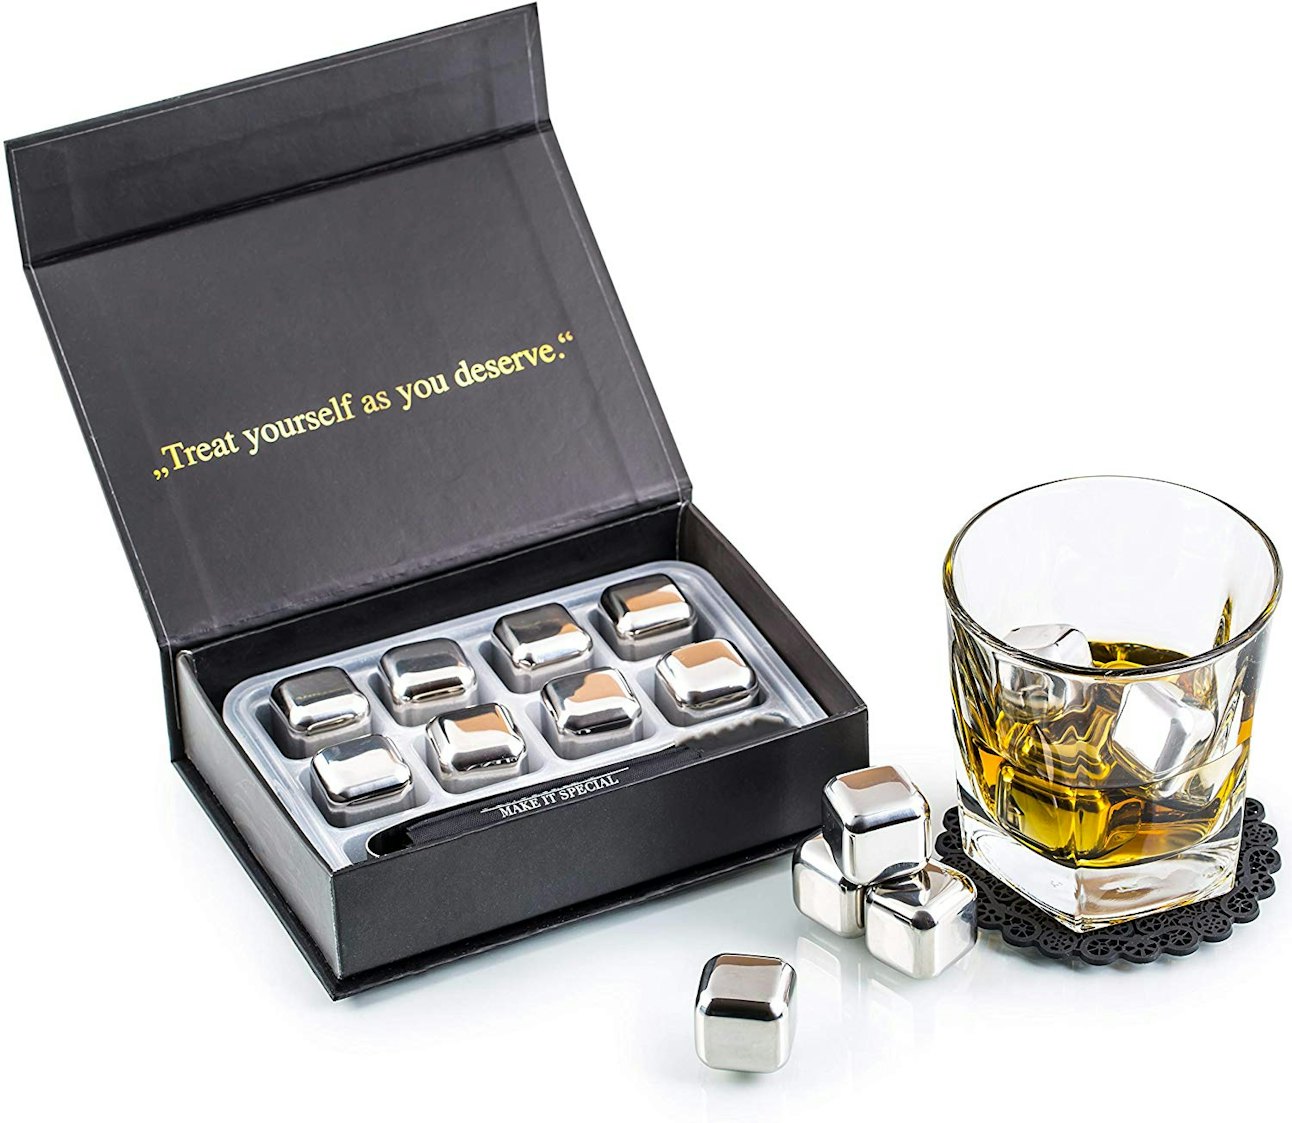 32 Useful Gifts For Practical Men That They'll Actually Want